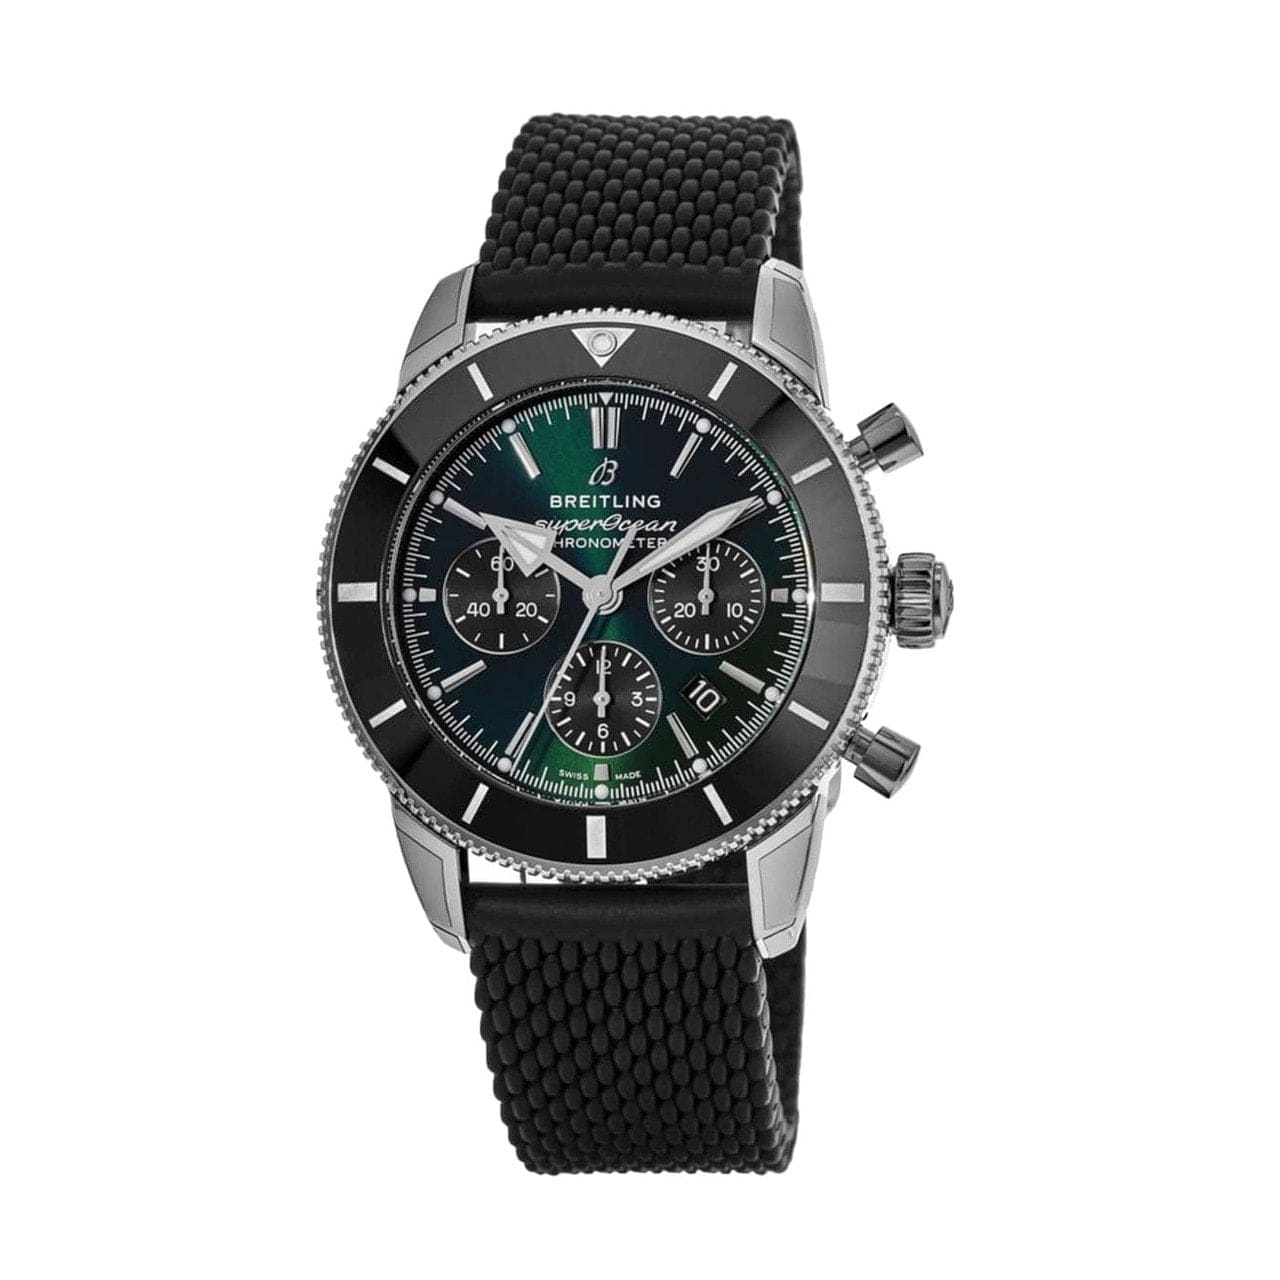 Breitling AB01621A1L1S1 Superocean Heritage II Green Dial Men's Black Rubber Chronograph Watch